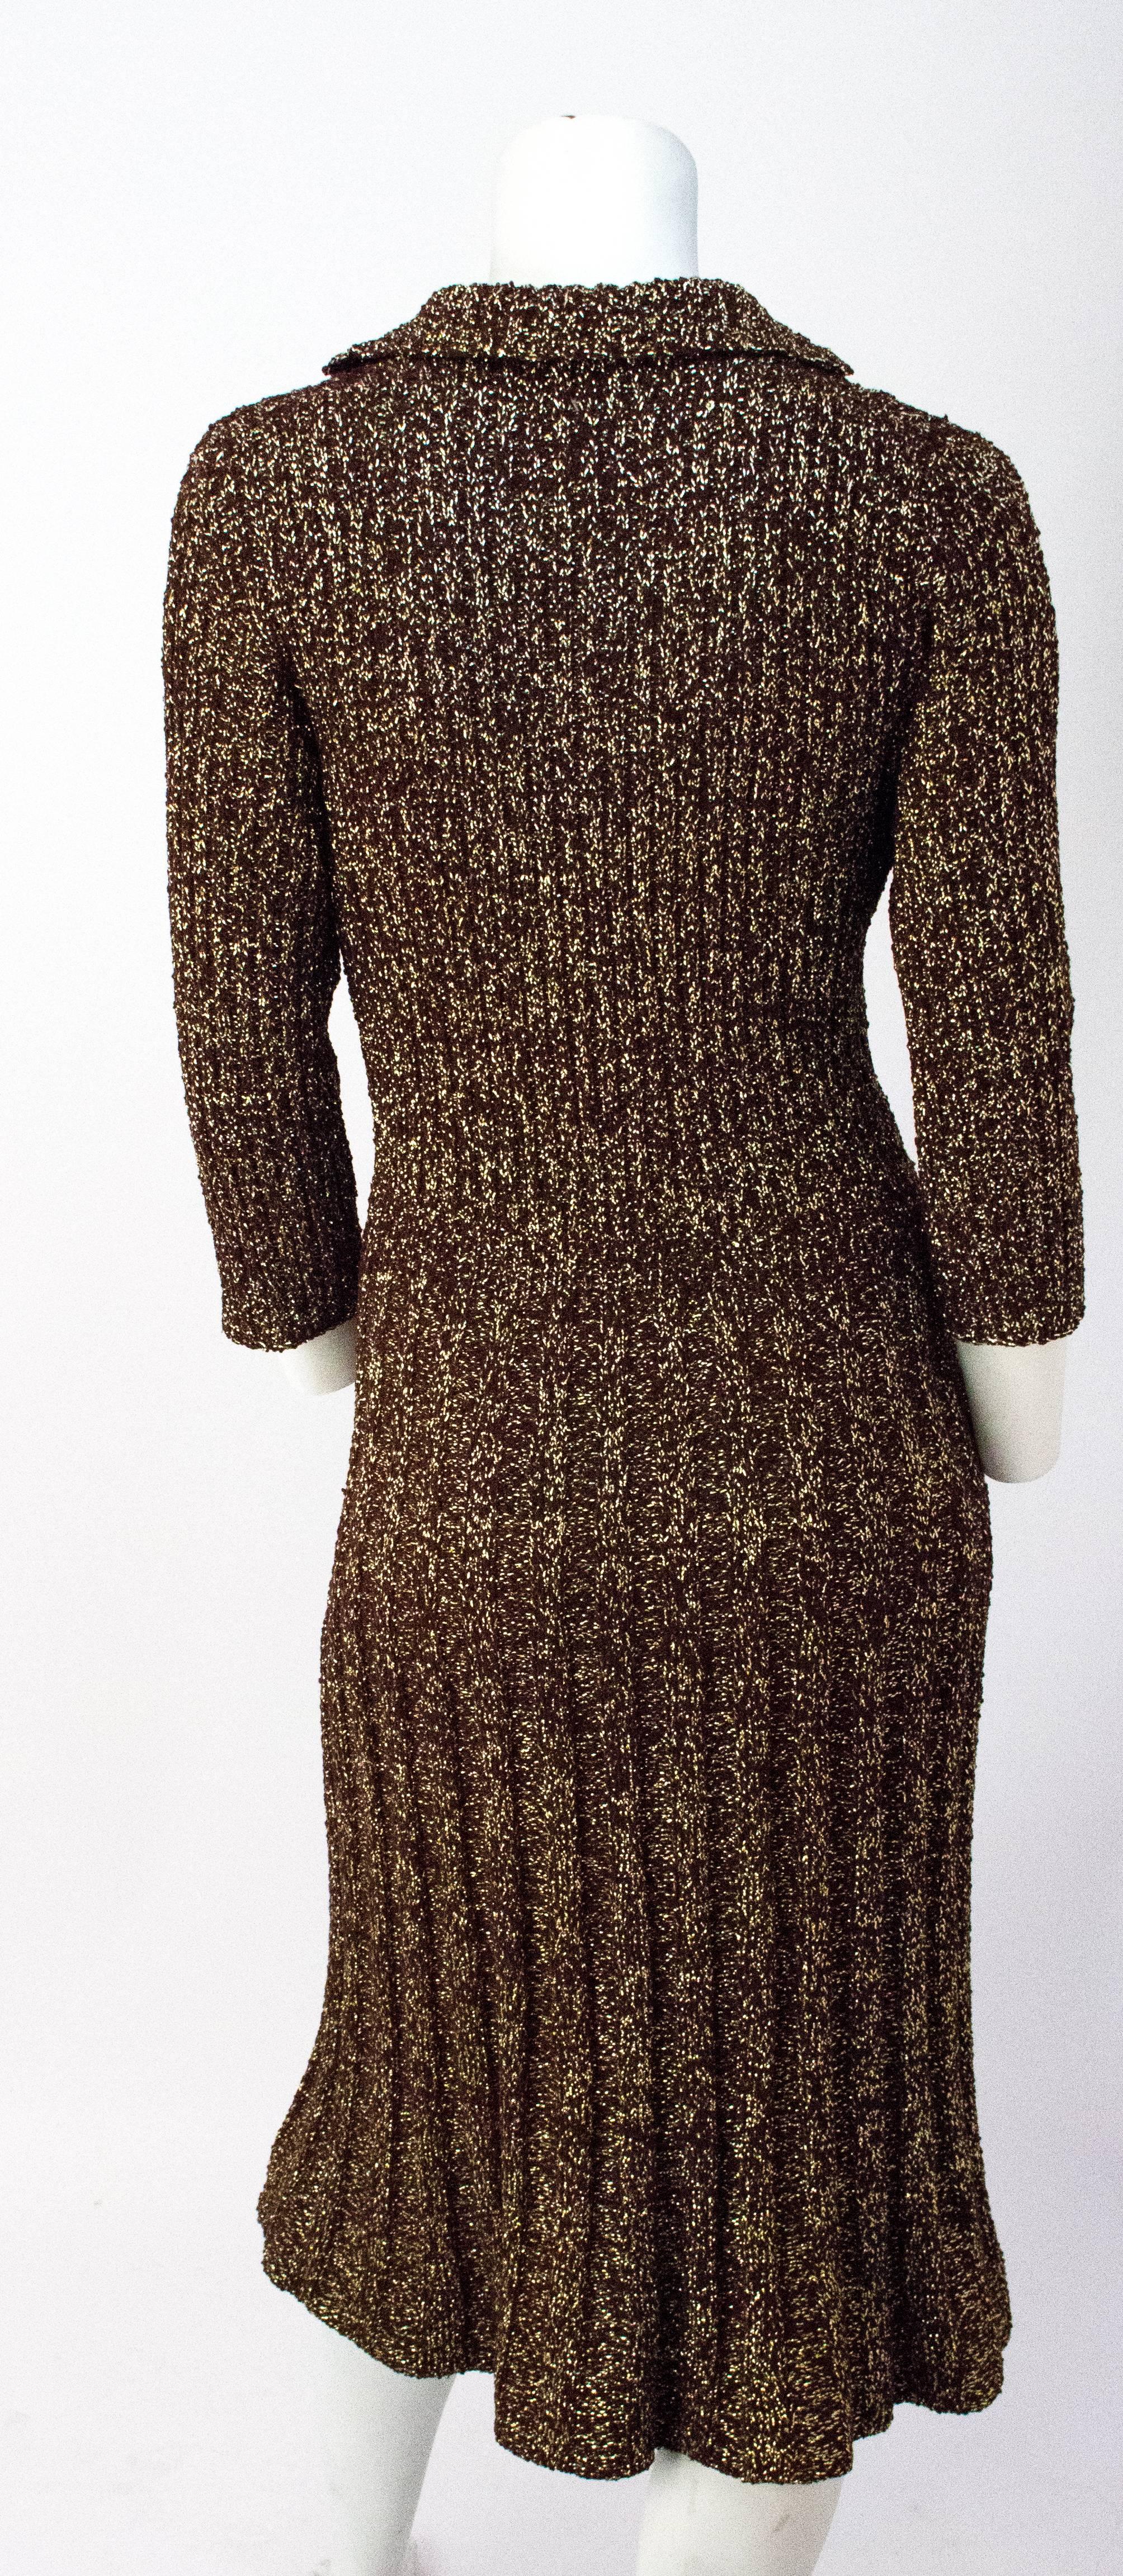 40s Brown & Gold Knit Sweater Dress. Metallic gold thread woven throughout. Buttons up the front with matching covered buttons. Unlined. 

